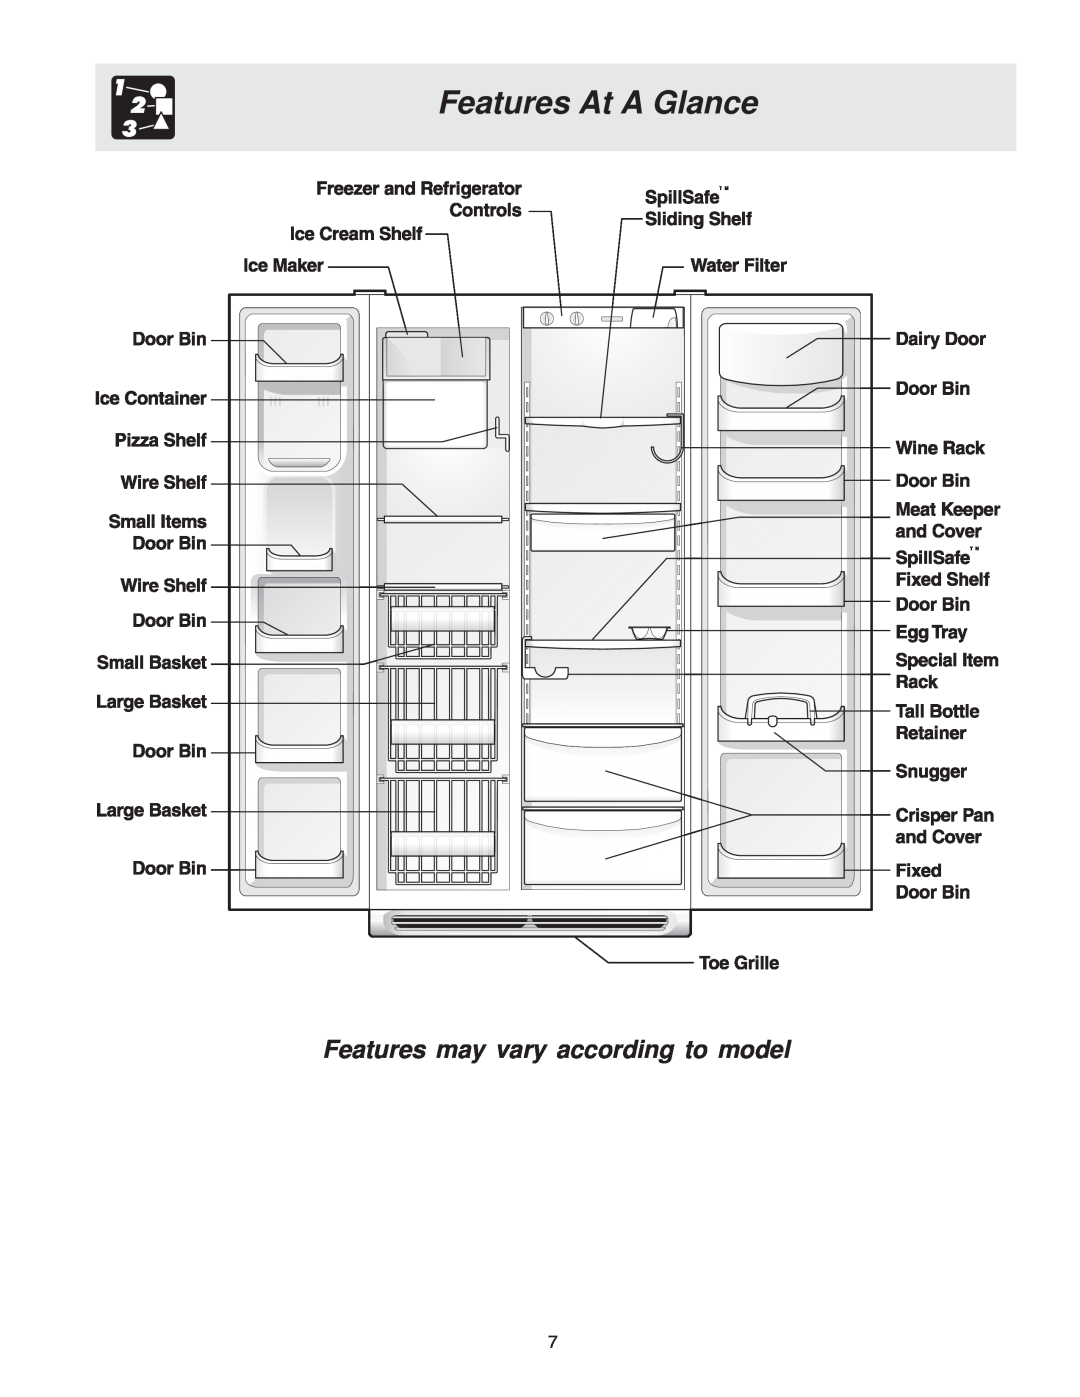 Frigidaire FRS26KF7AW0, FRS26KF7AQ0, FRS26KF7AW1 manual Features At A Glance, Features may vary according to model 